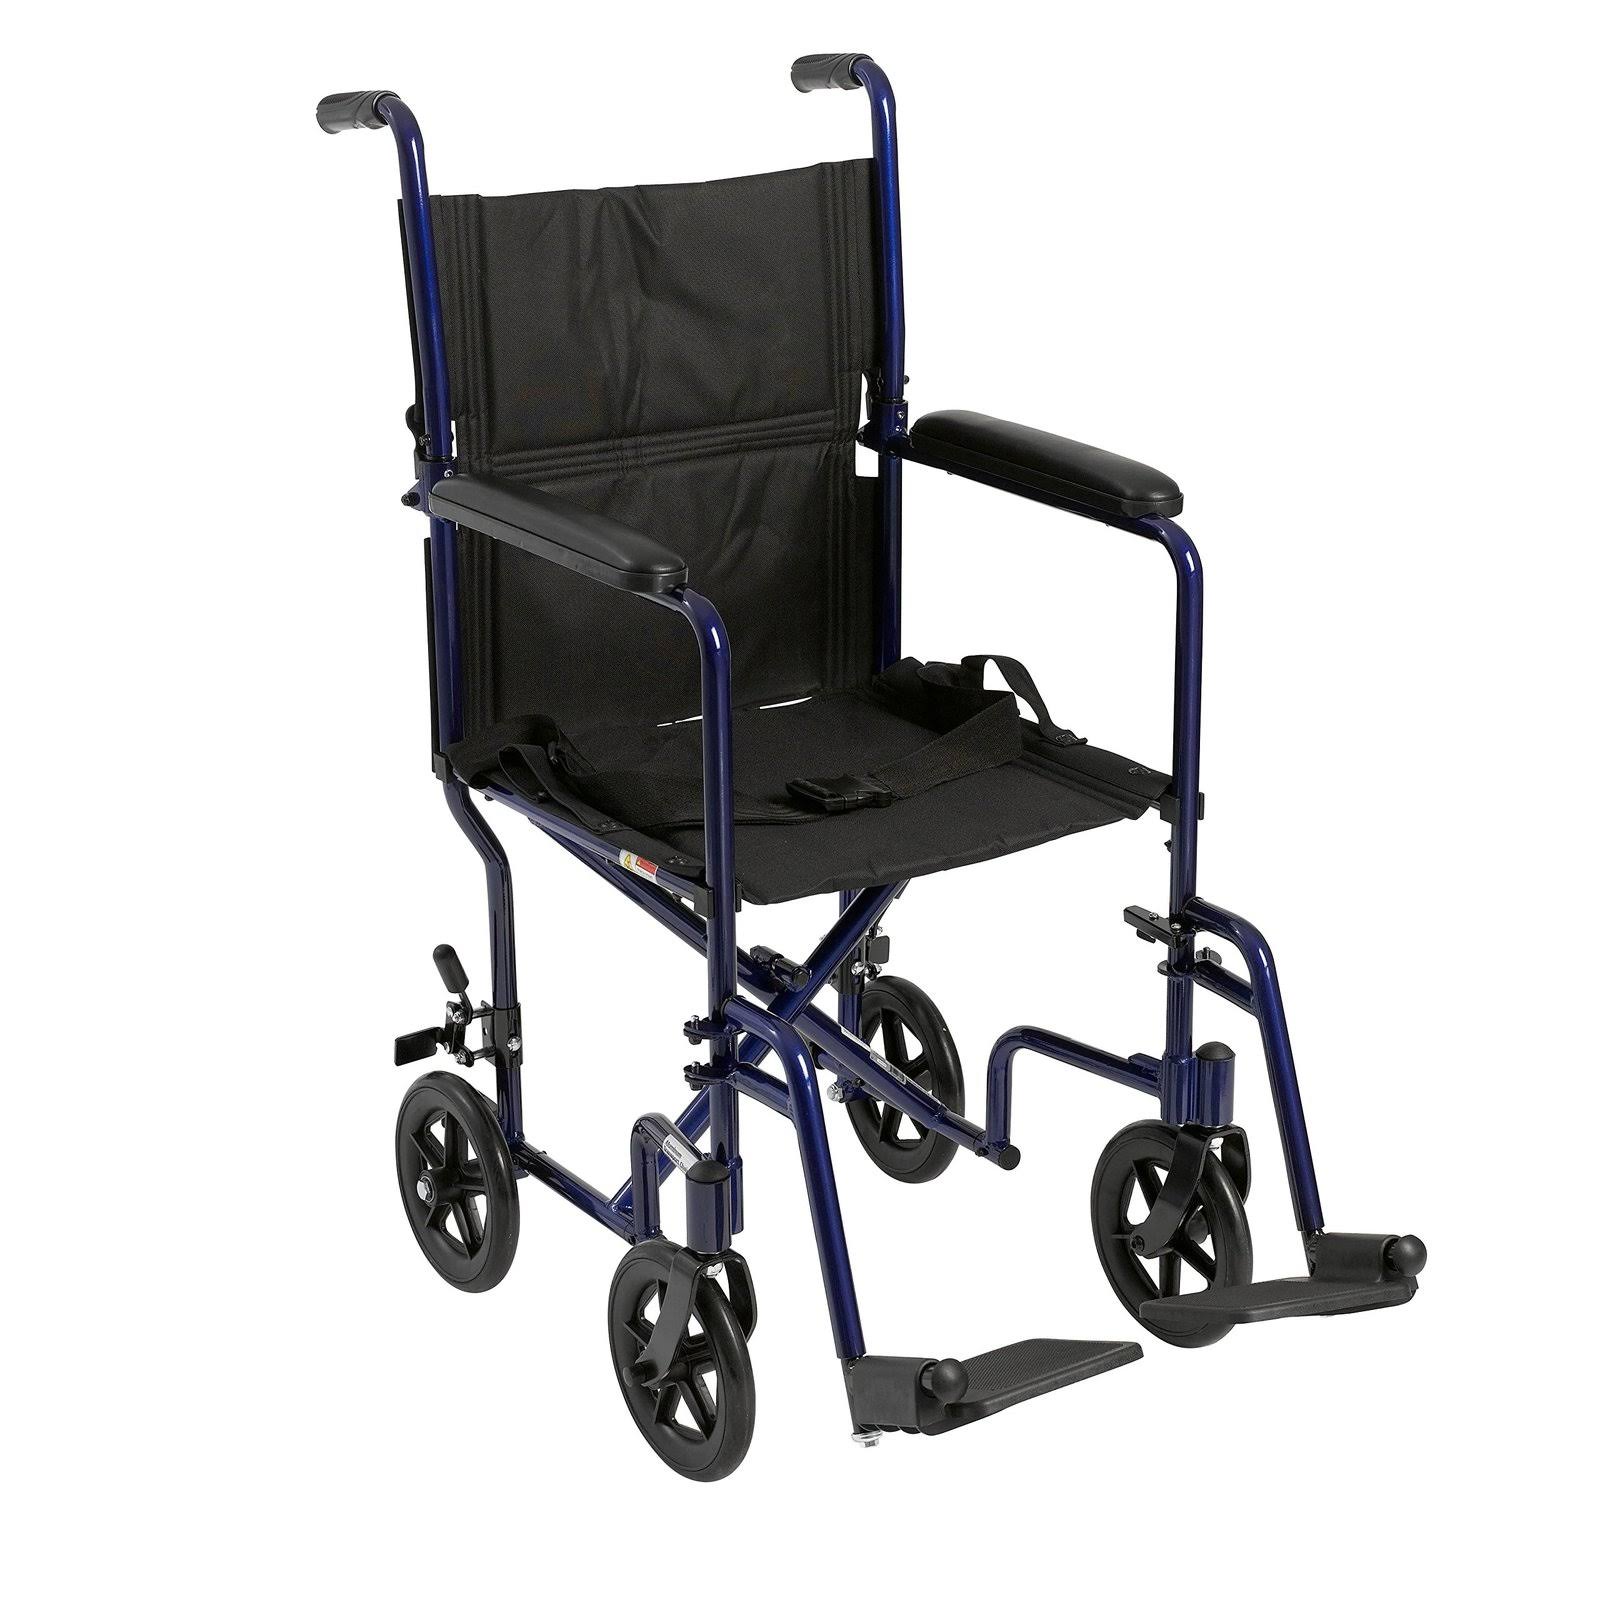 Drive Medical Lightweight Transport Wheelchair - Black and Blue, 19"